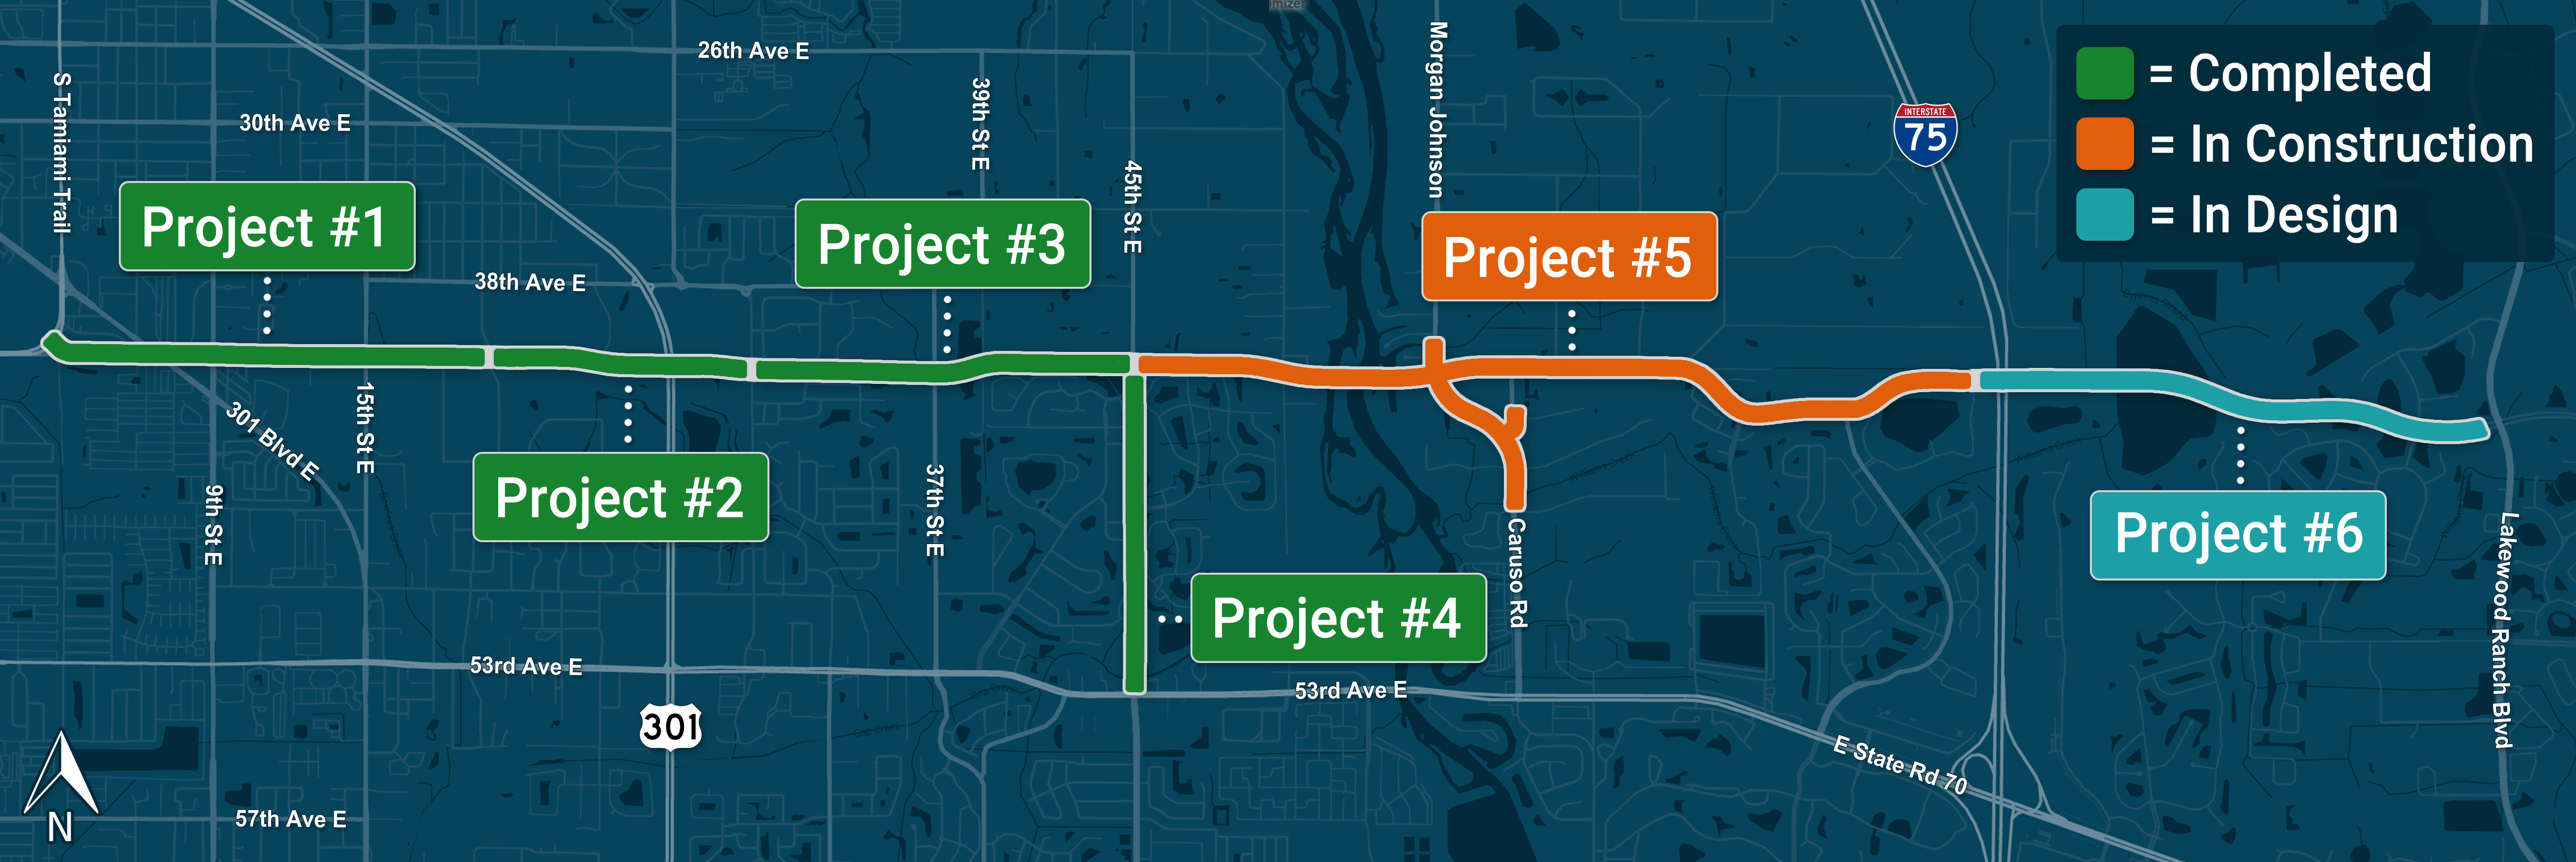 44th Ave East Extension Projects Overview Map